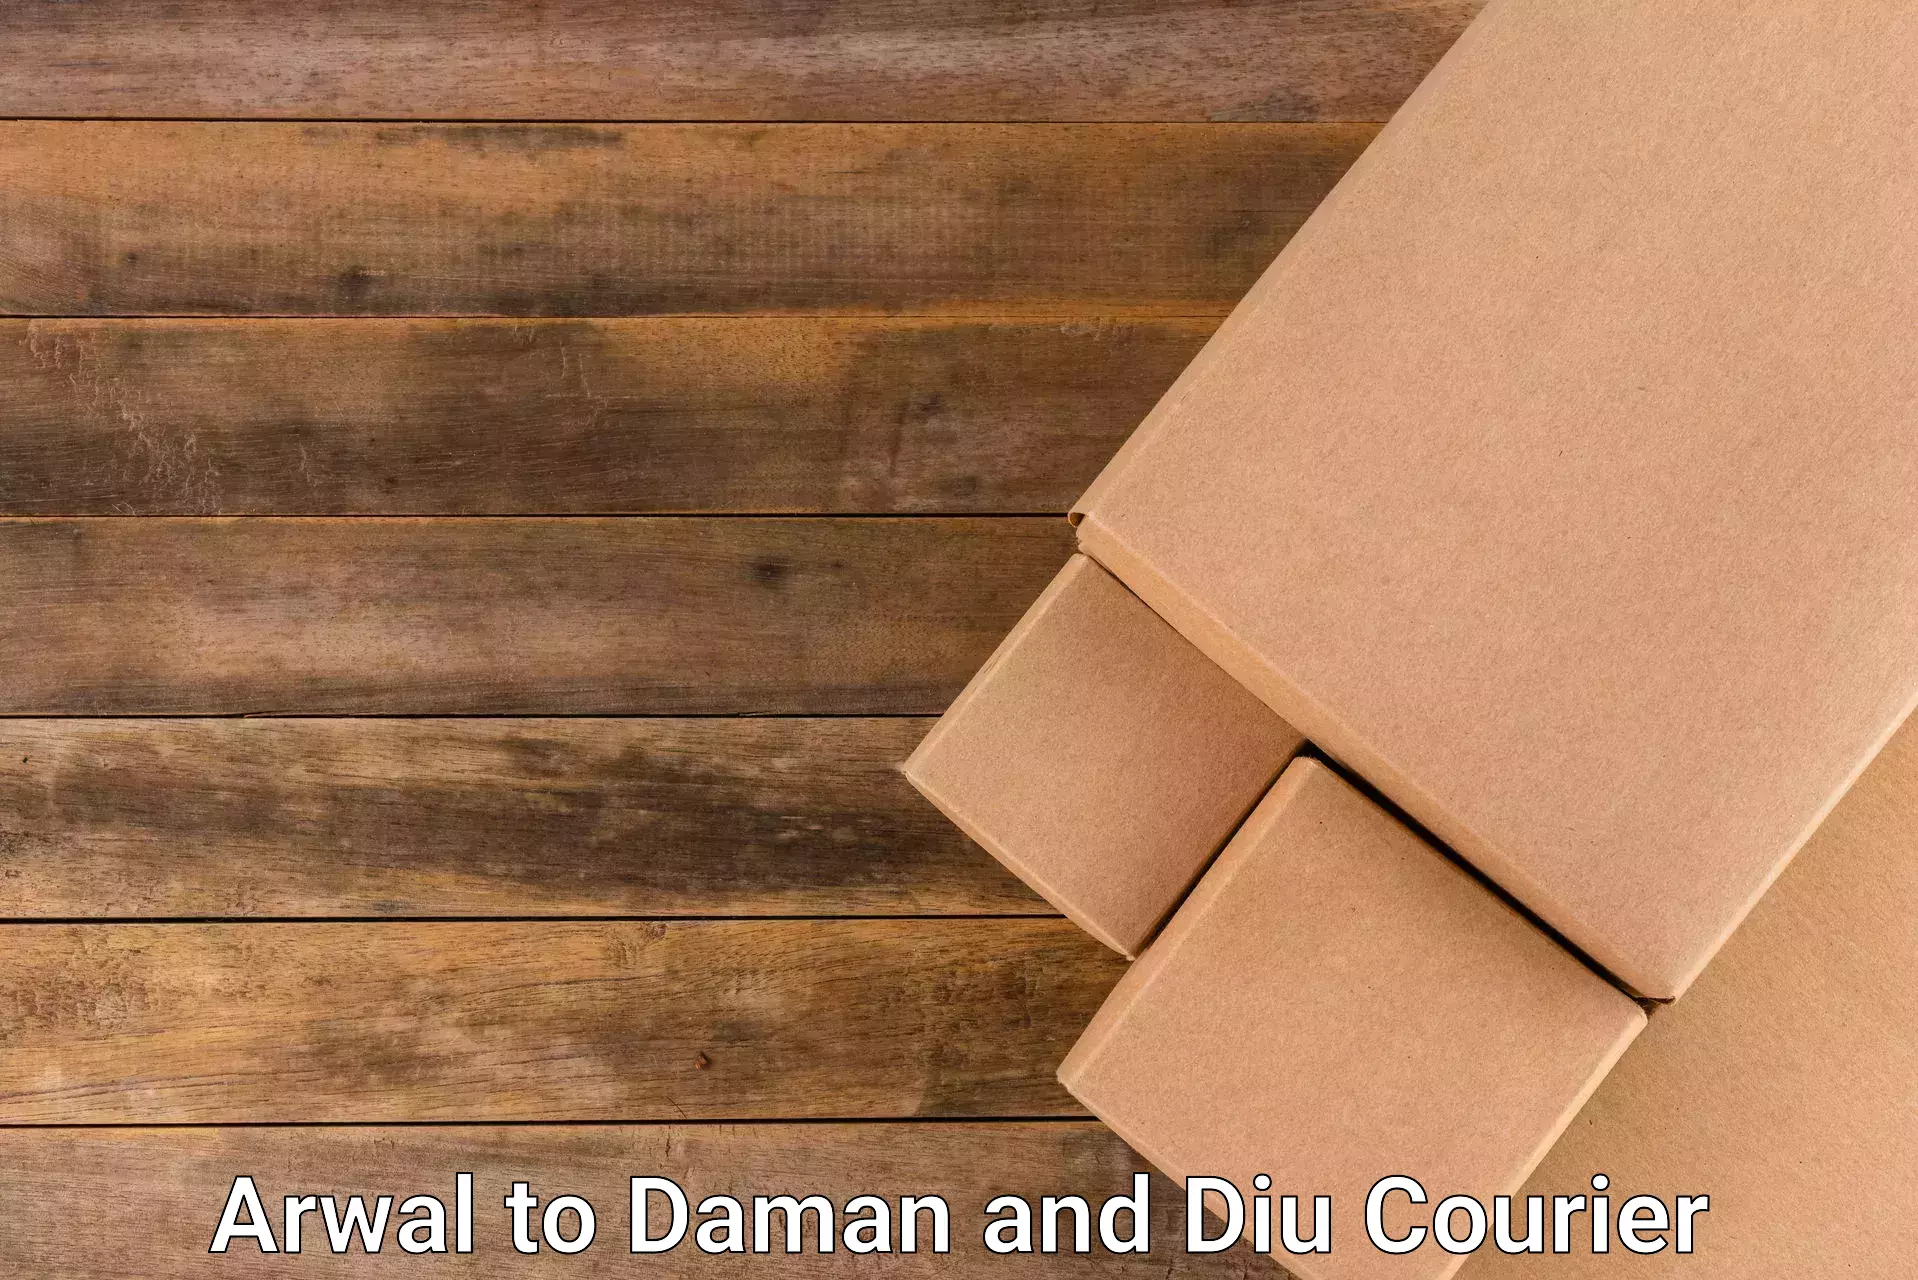 24/7 courier service Arwal to Diu